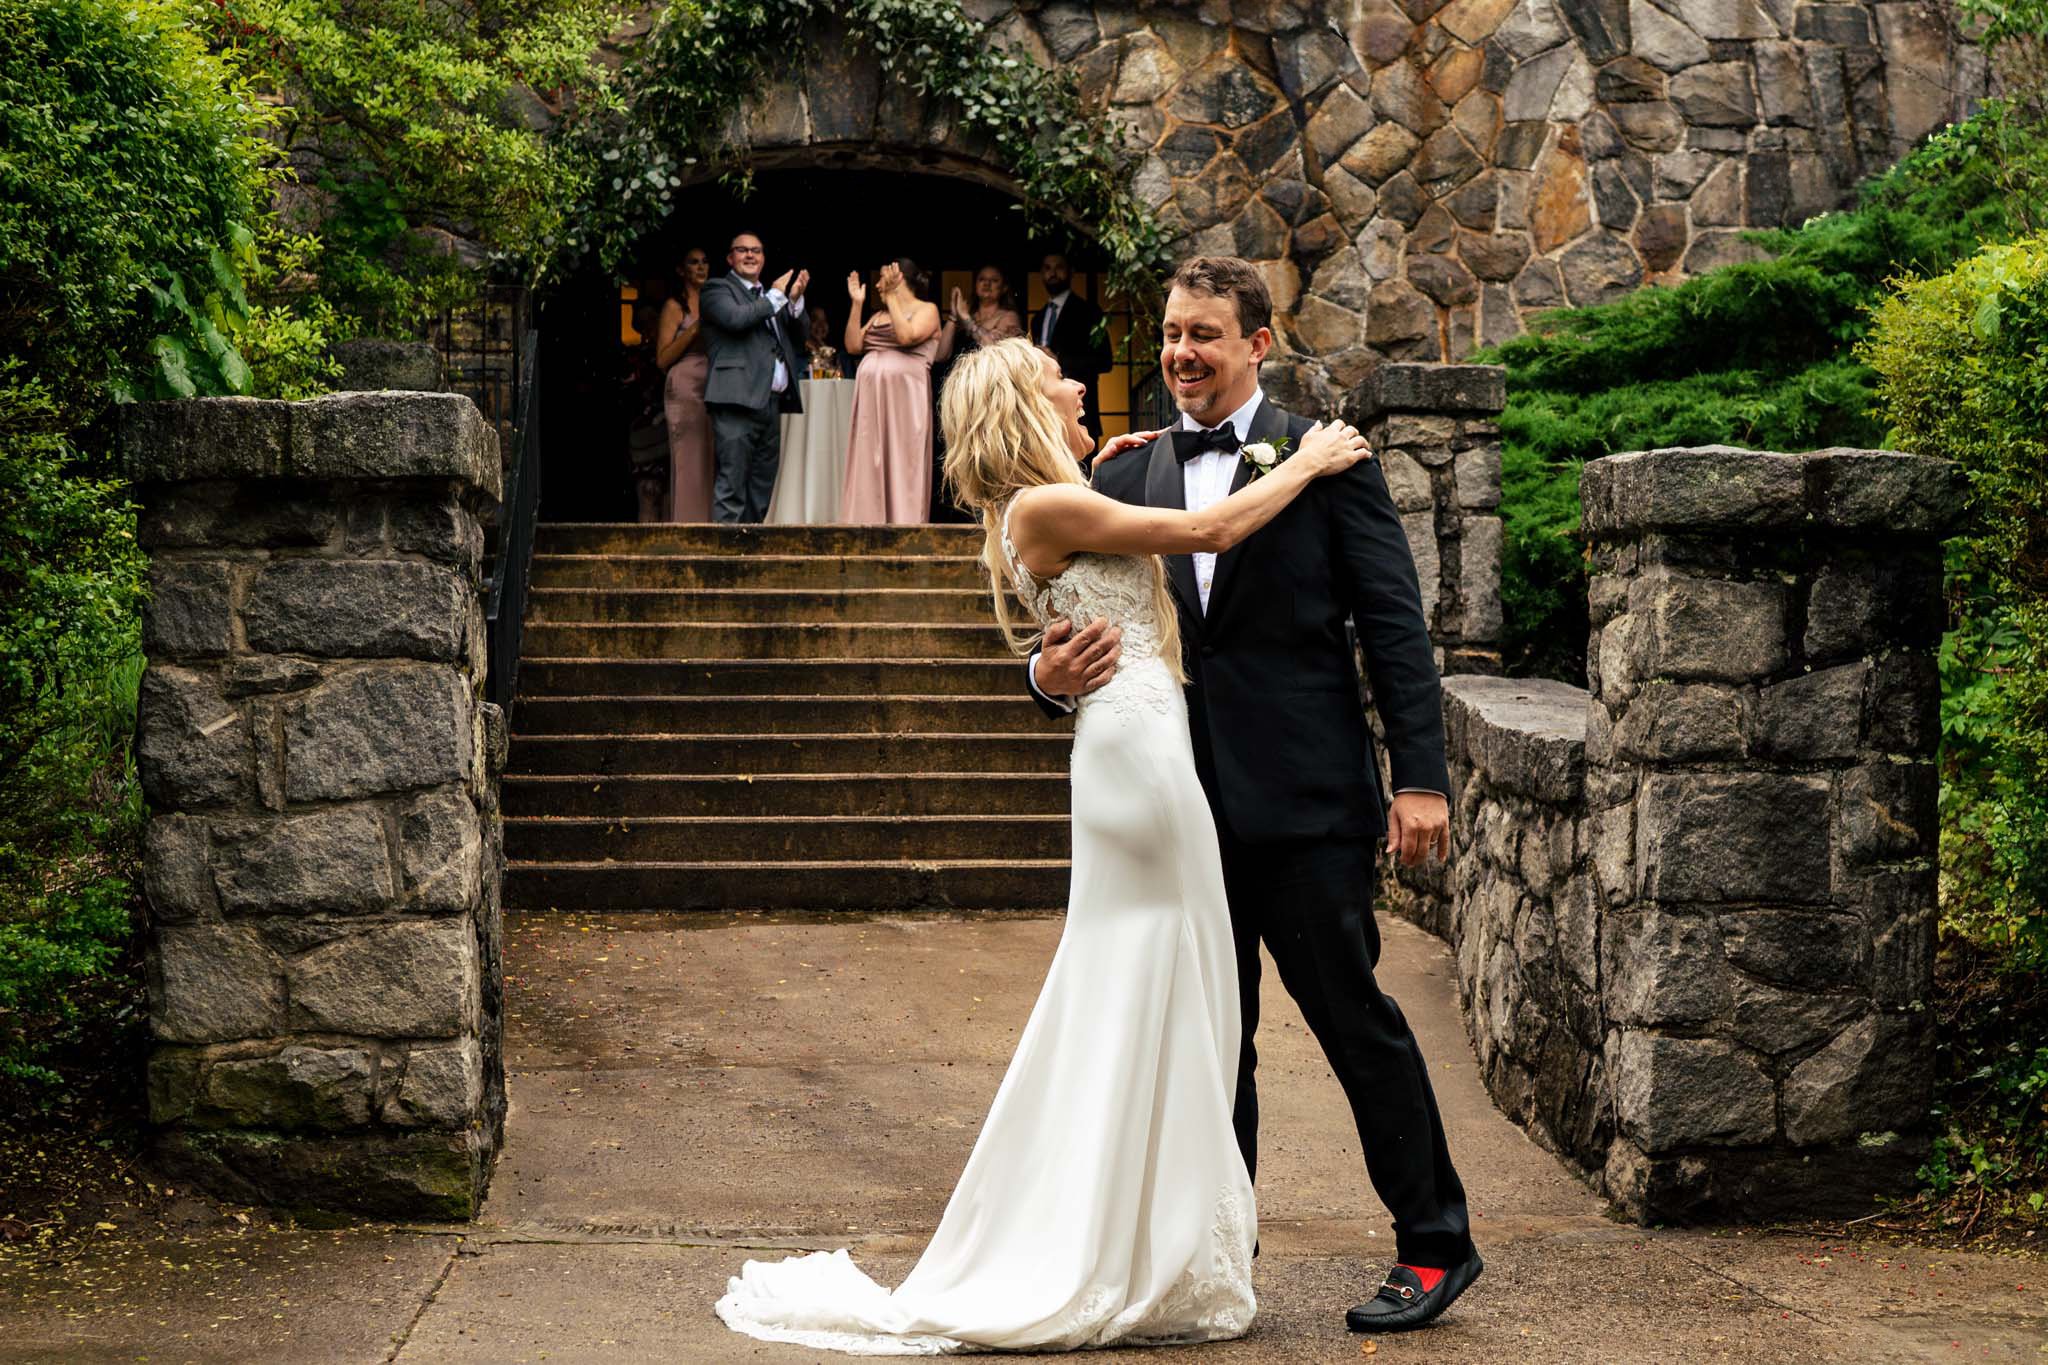 Bride and groom dancing joyfully outdoors at a Homewood wedding in Asheville, NC, with guests watching from a stone archway in a lush garden setting.